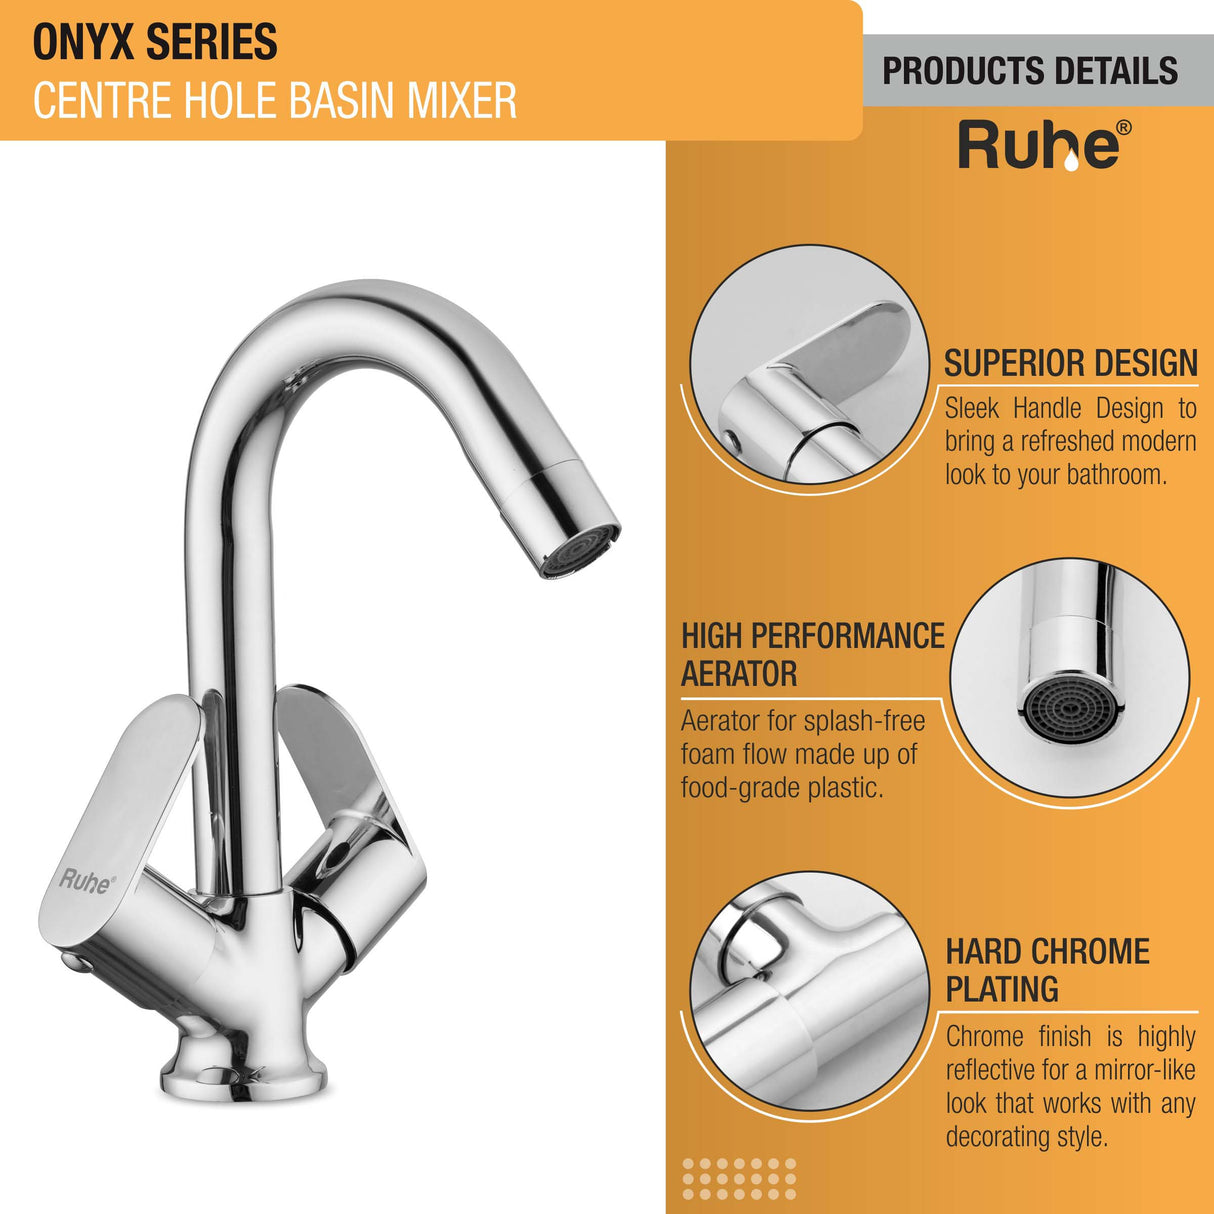 Onyx Centre Hole Basin Mixer Brass Faucet with Small (12 inches) Round Spout product details with superior design, foam flow aerator, chrome plating